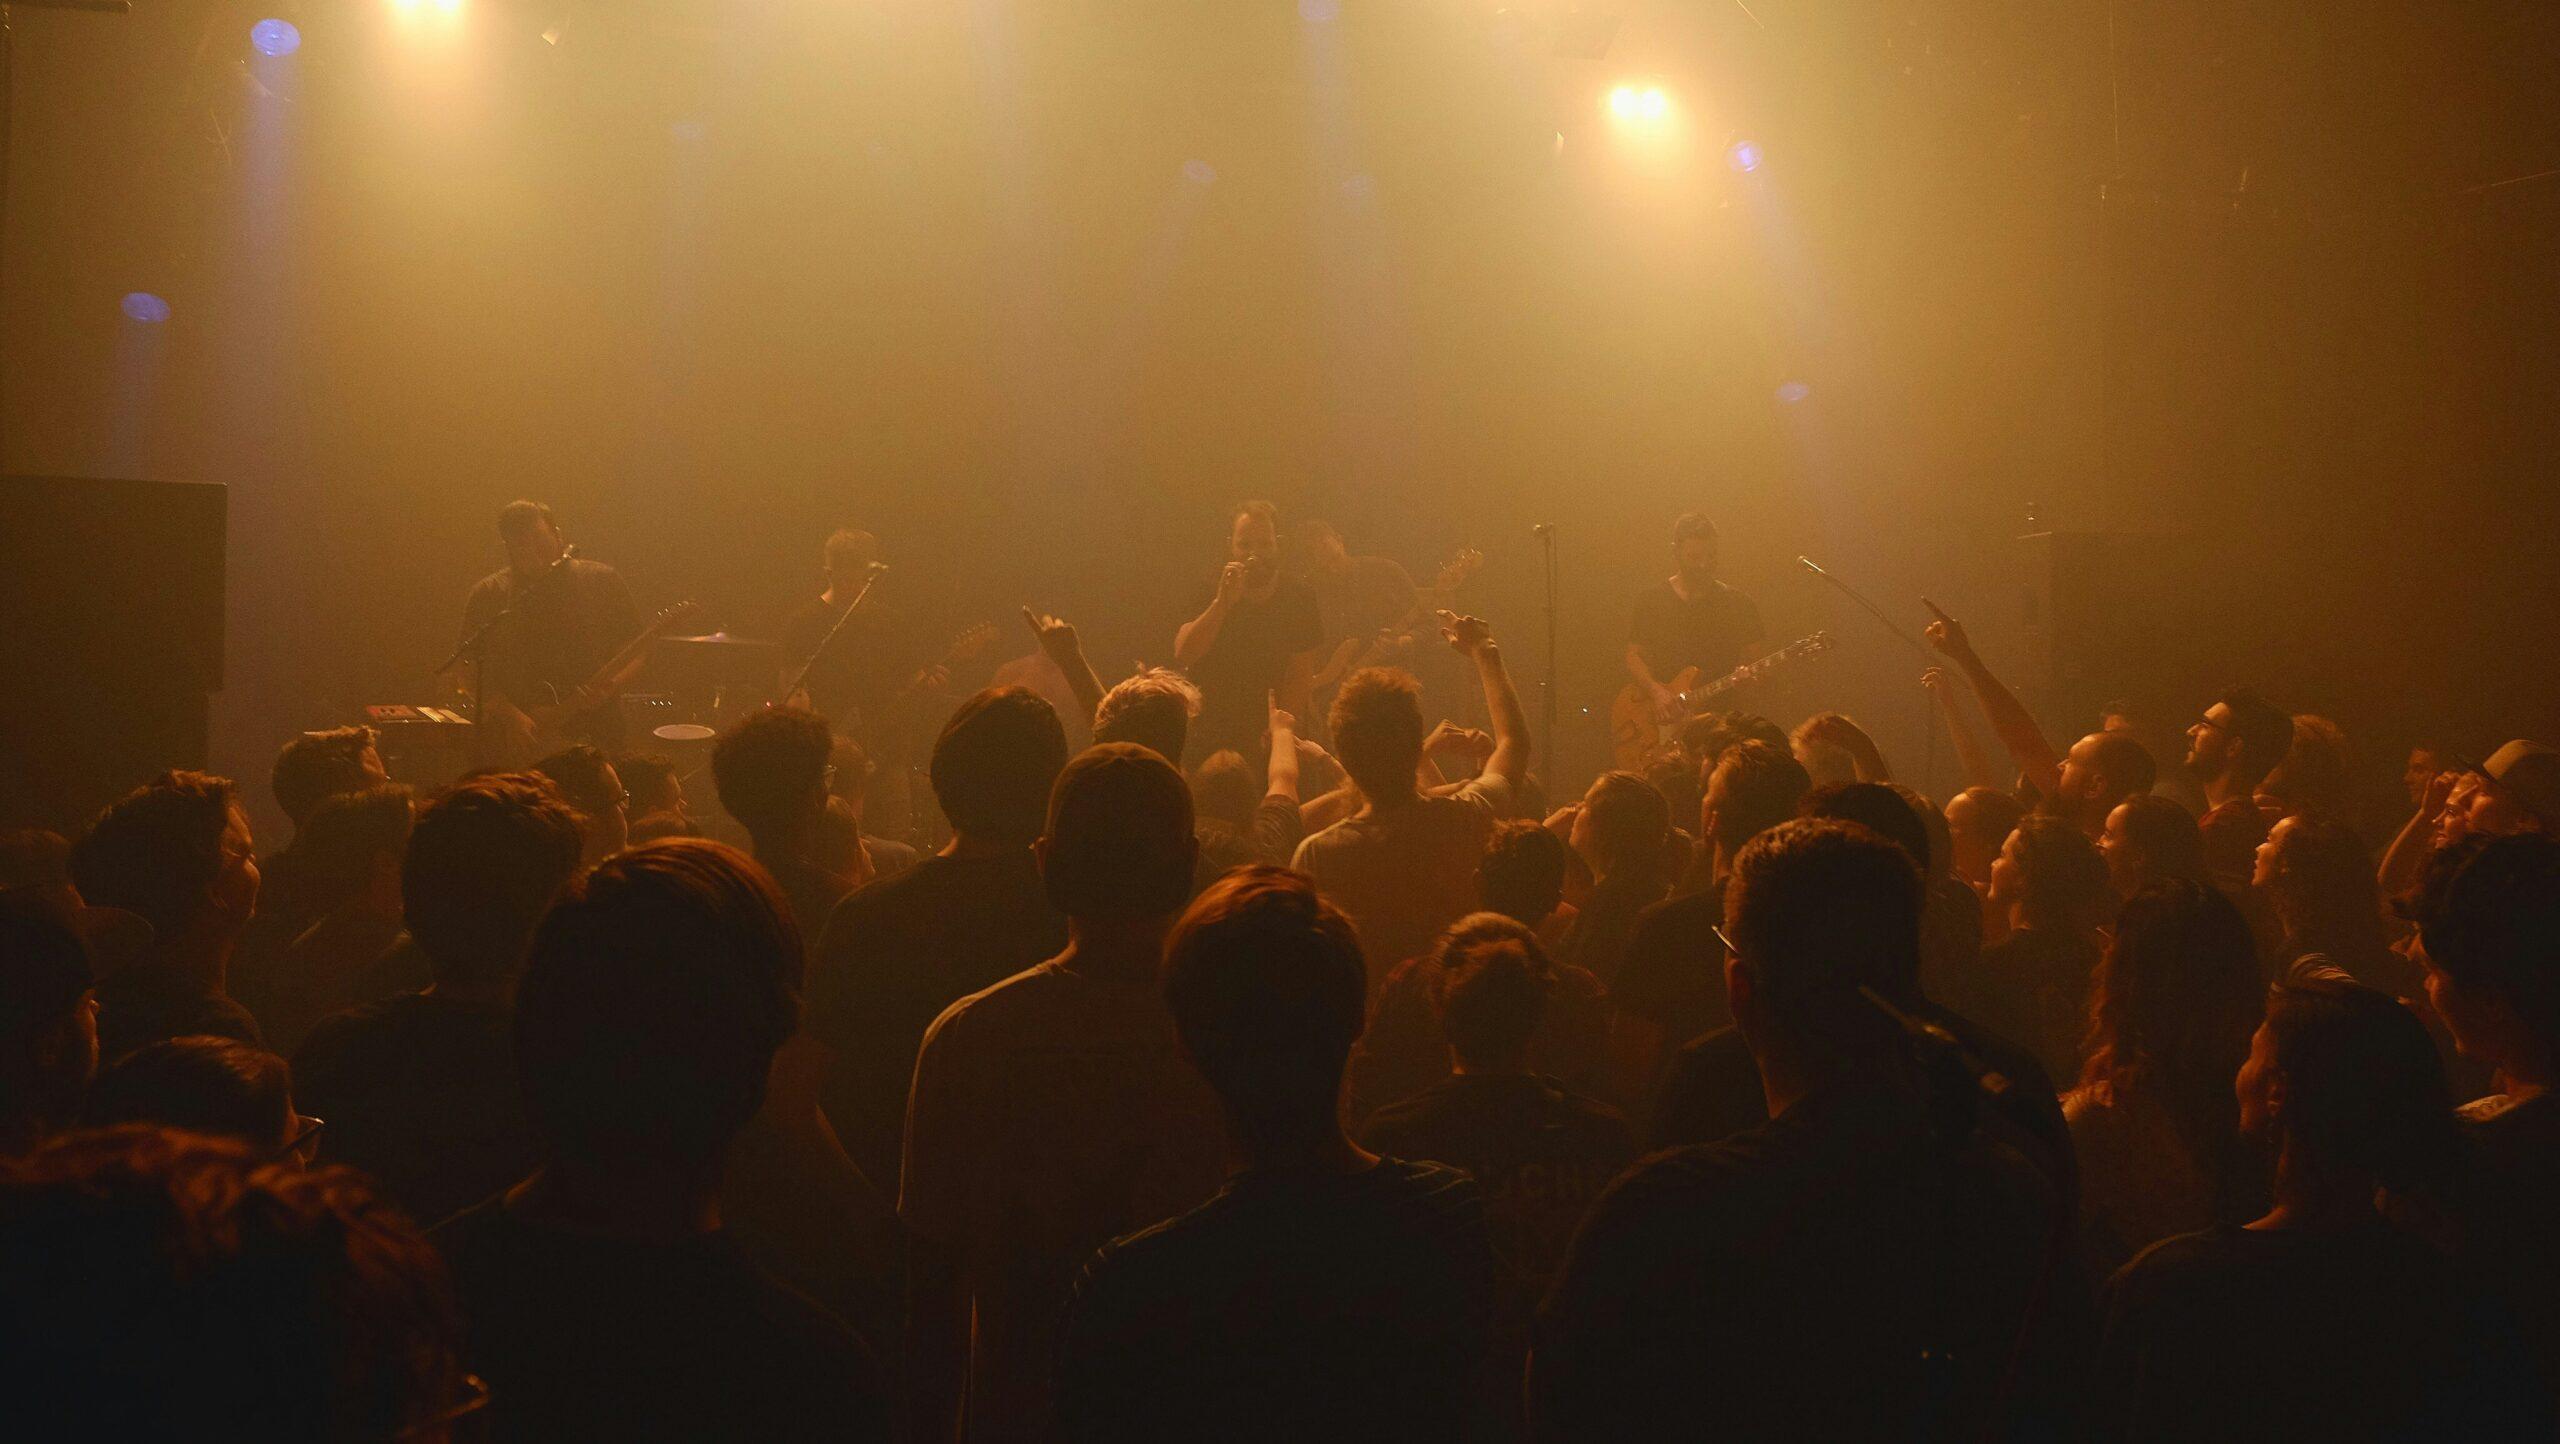 Crowd watching an unidentified musical band perform in a dimly lit venue.